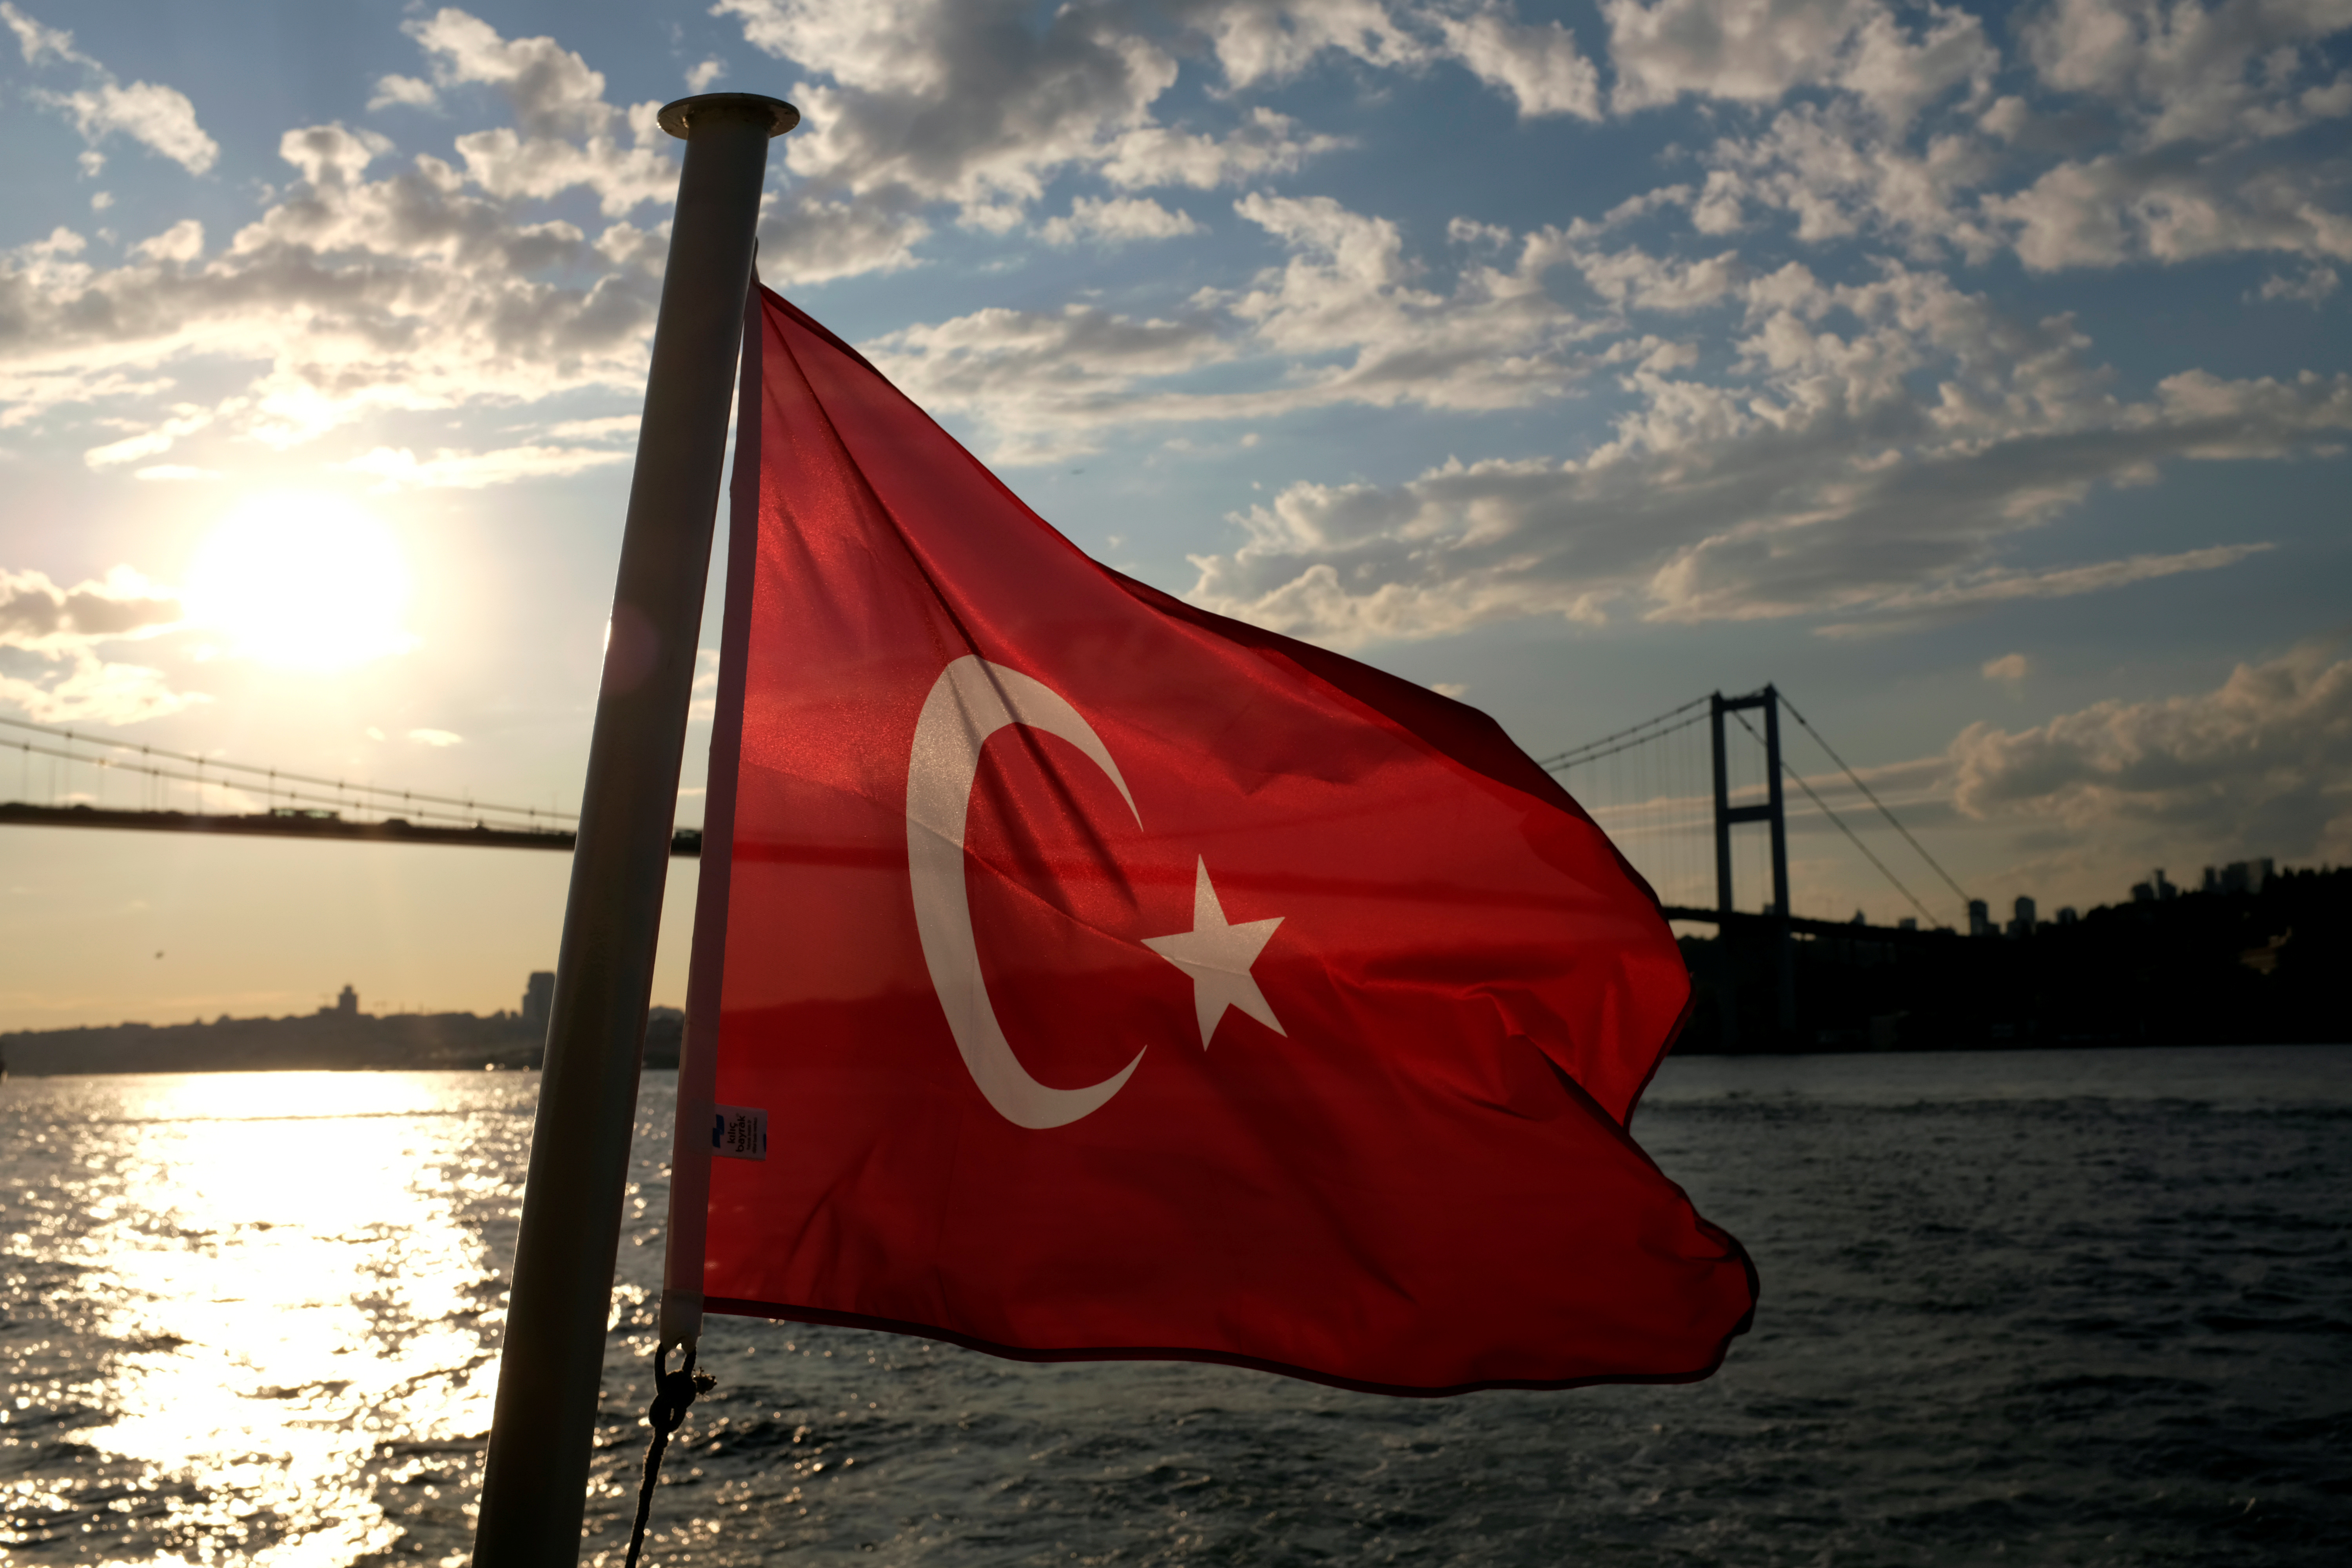 A Turkish flag with the Bosphorus Bridge in the background flies on a passenger ferry in Istanbul